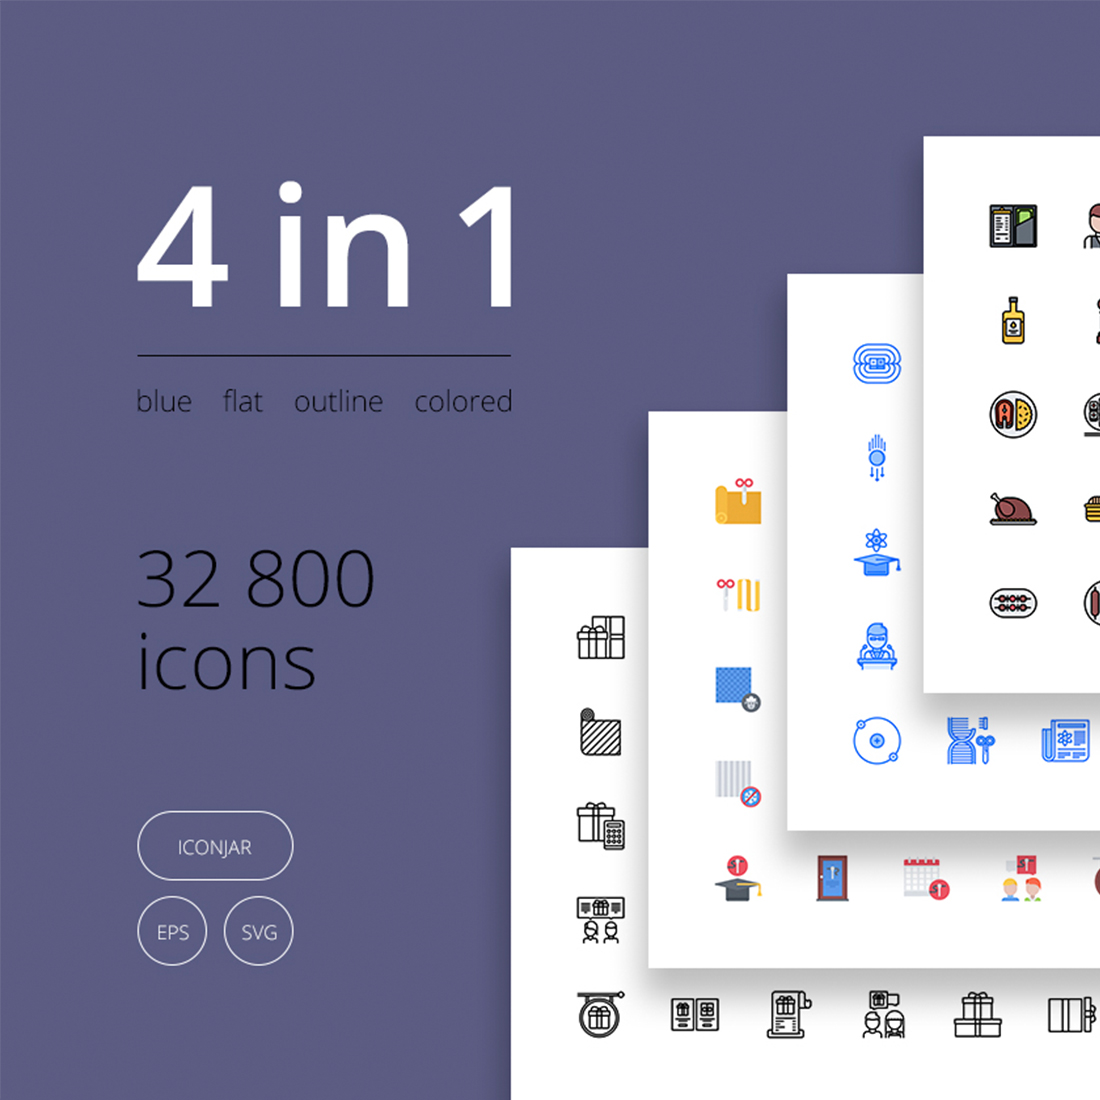 4in1 Icon Set - 32 800 Icons, 4 Styles main cover.